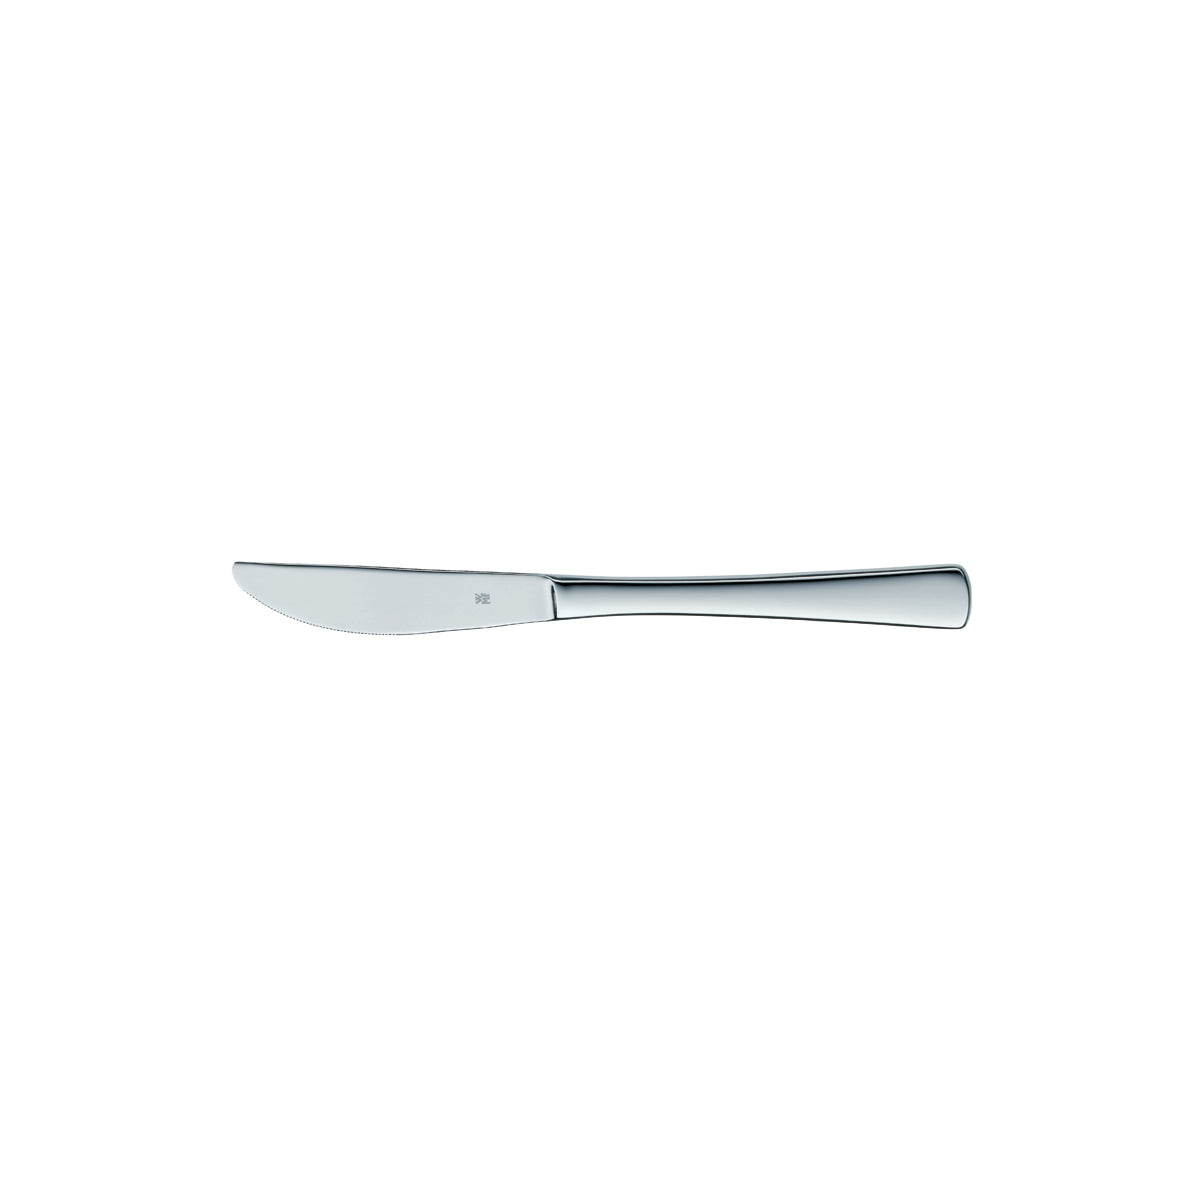 12.0803.6047 WMF Gastro Table Knife - Hollow Handle Stainless Steel Tomkin Australia Hospitality Supplies